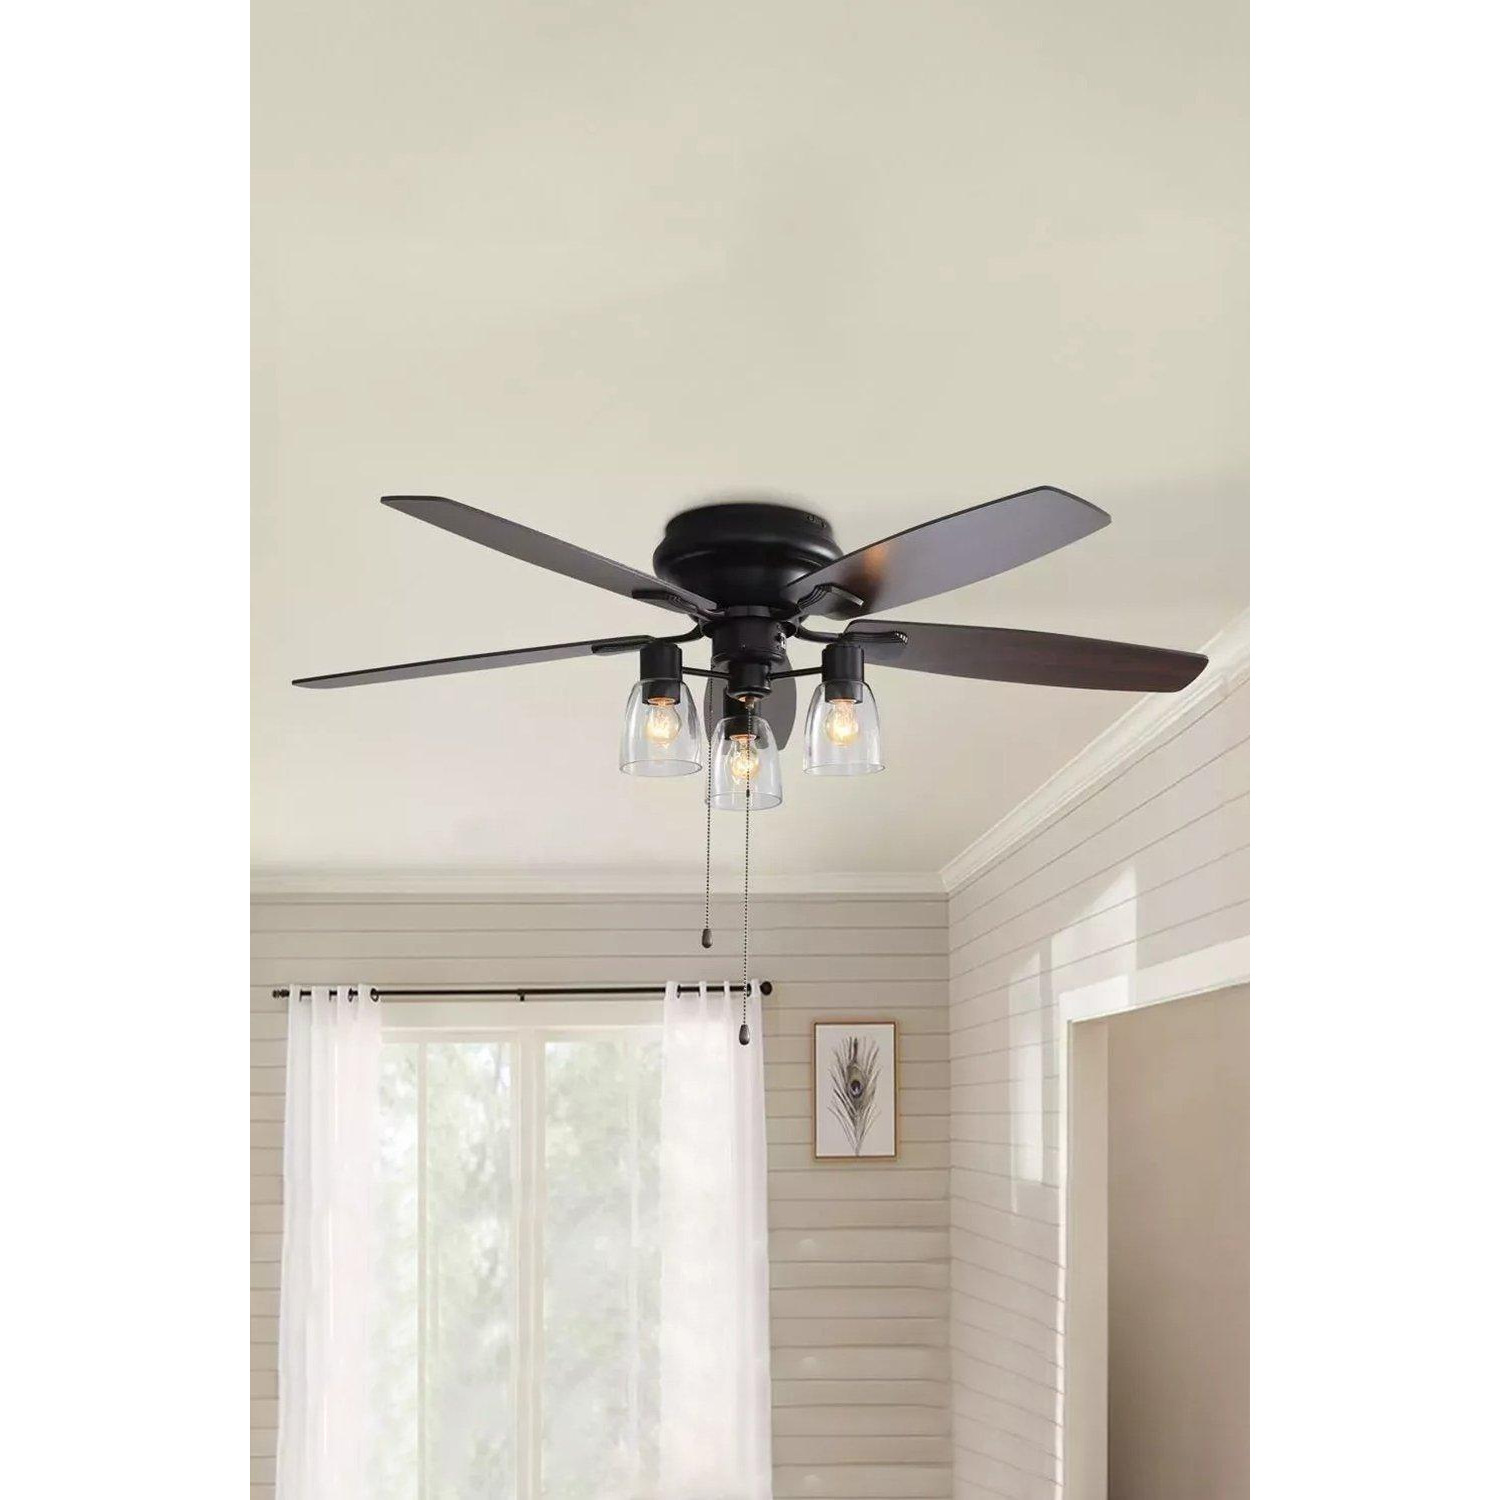 52-inch Low Profile Ceiling Fan Light with Remote - image 1